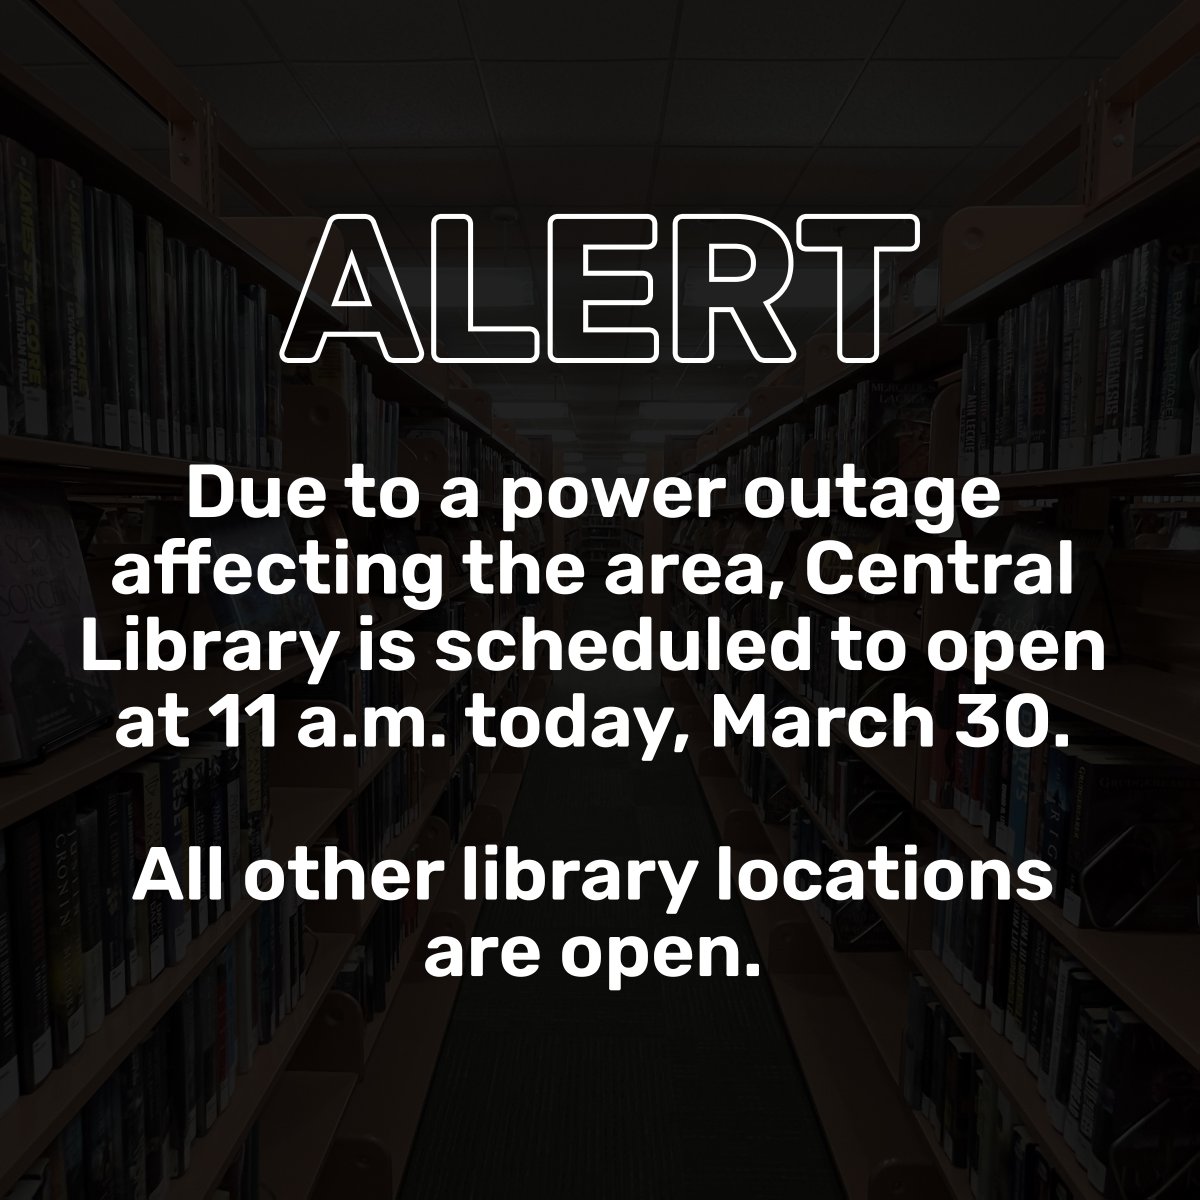 ALERT: Due to a power outage affecting the area, Central Library is scheduled to open at 11 a.m. today, March 30. All other library locations are open. Check our website for the latest status updates. 🔗 library.arlingtonva.us